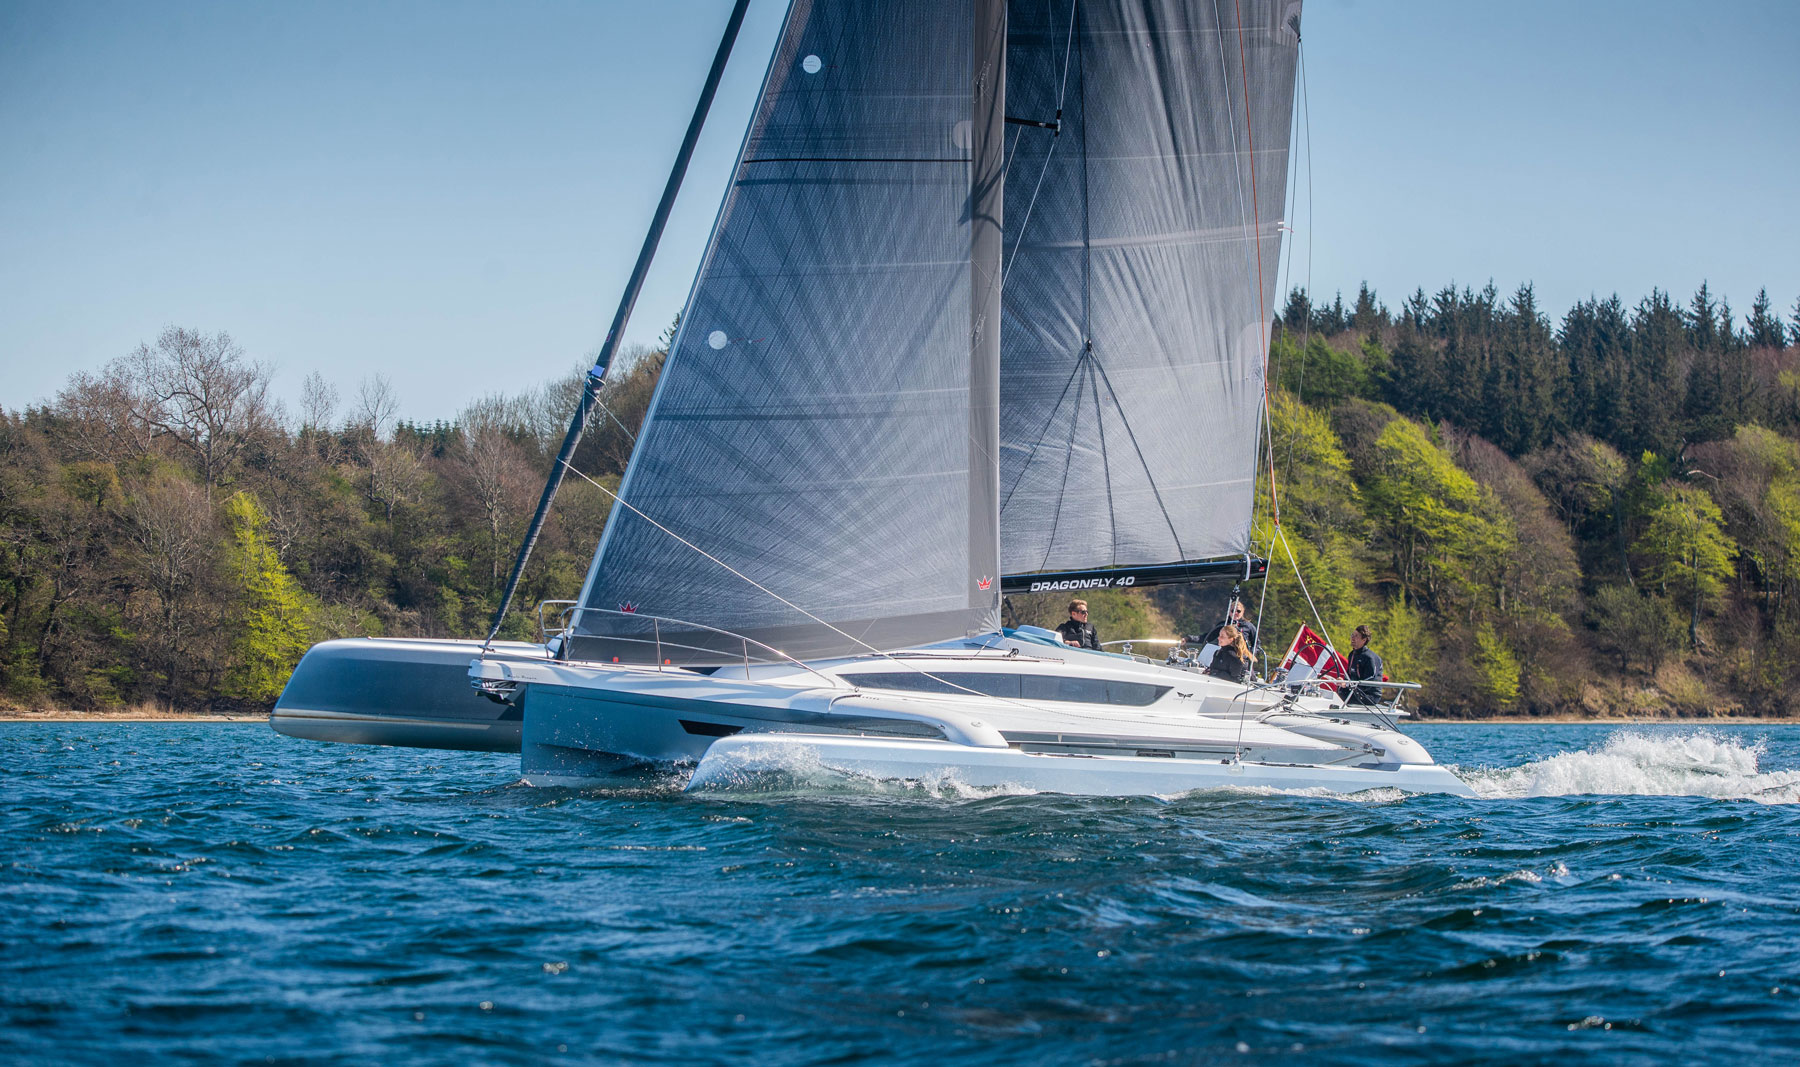 DRAGONFLY 40 WINS MULTIHULL OF THE YEAR